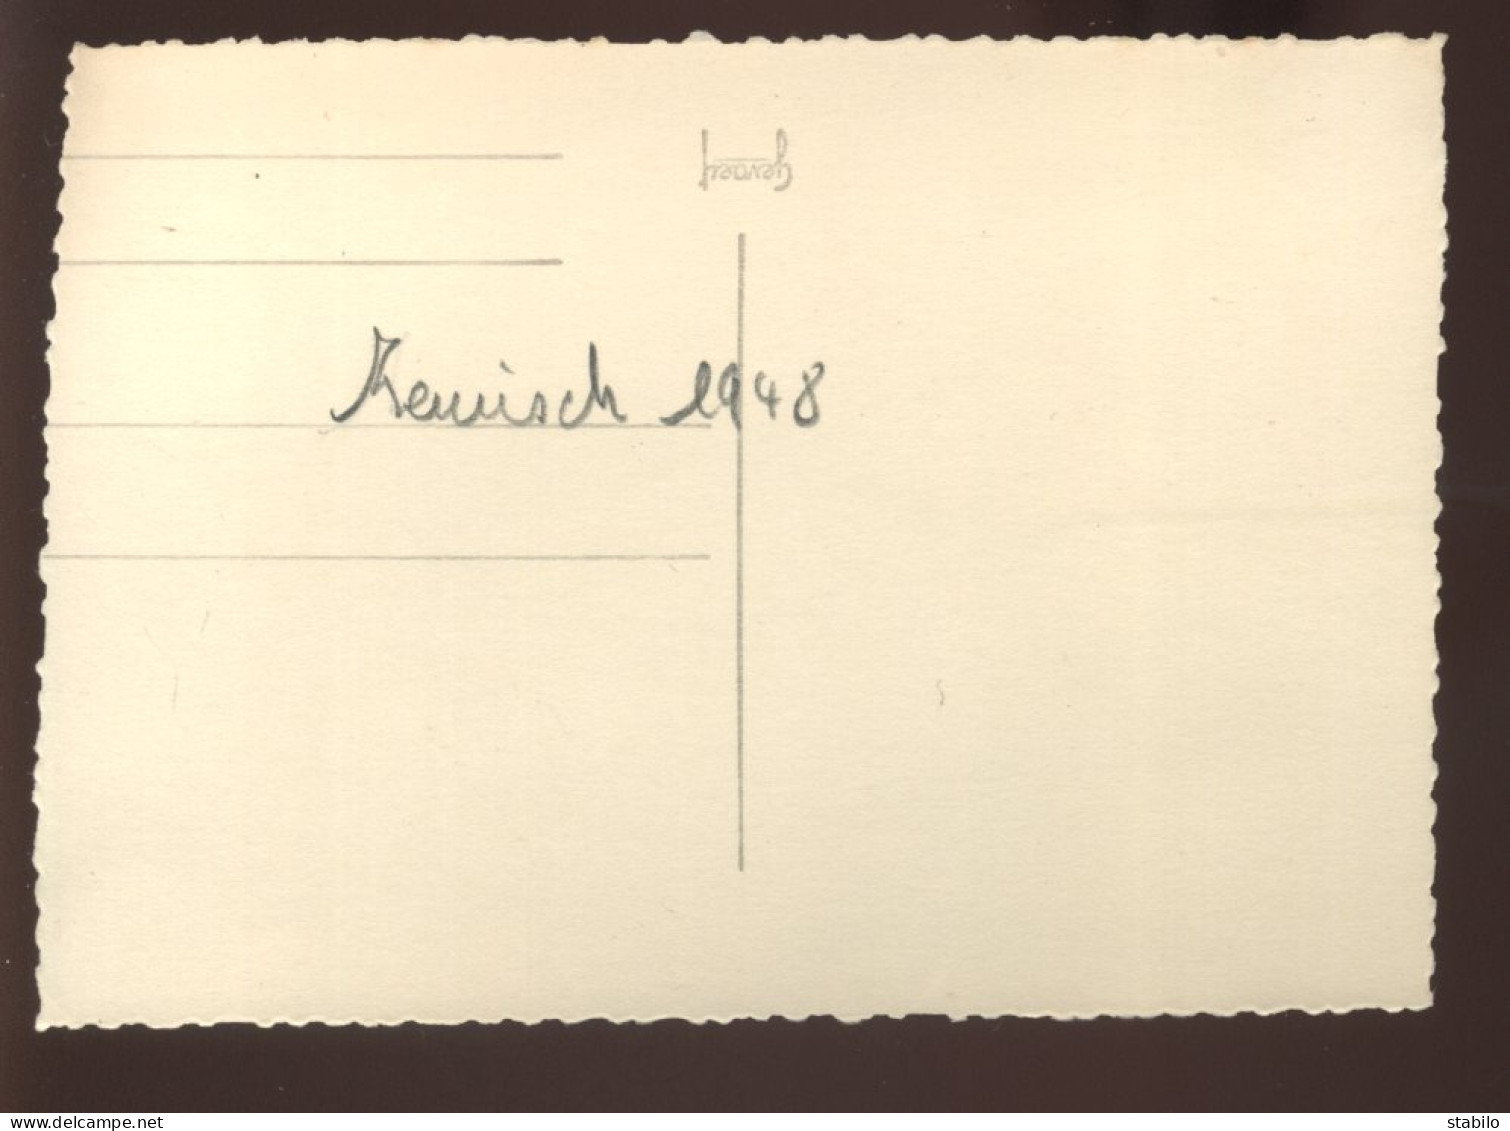 LUXEMBOURG - REMISCH - 1948 -  FORMAT 12 X 8 CM  - Lugares